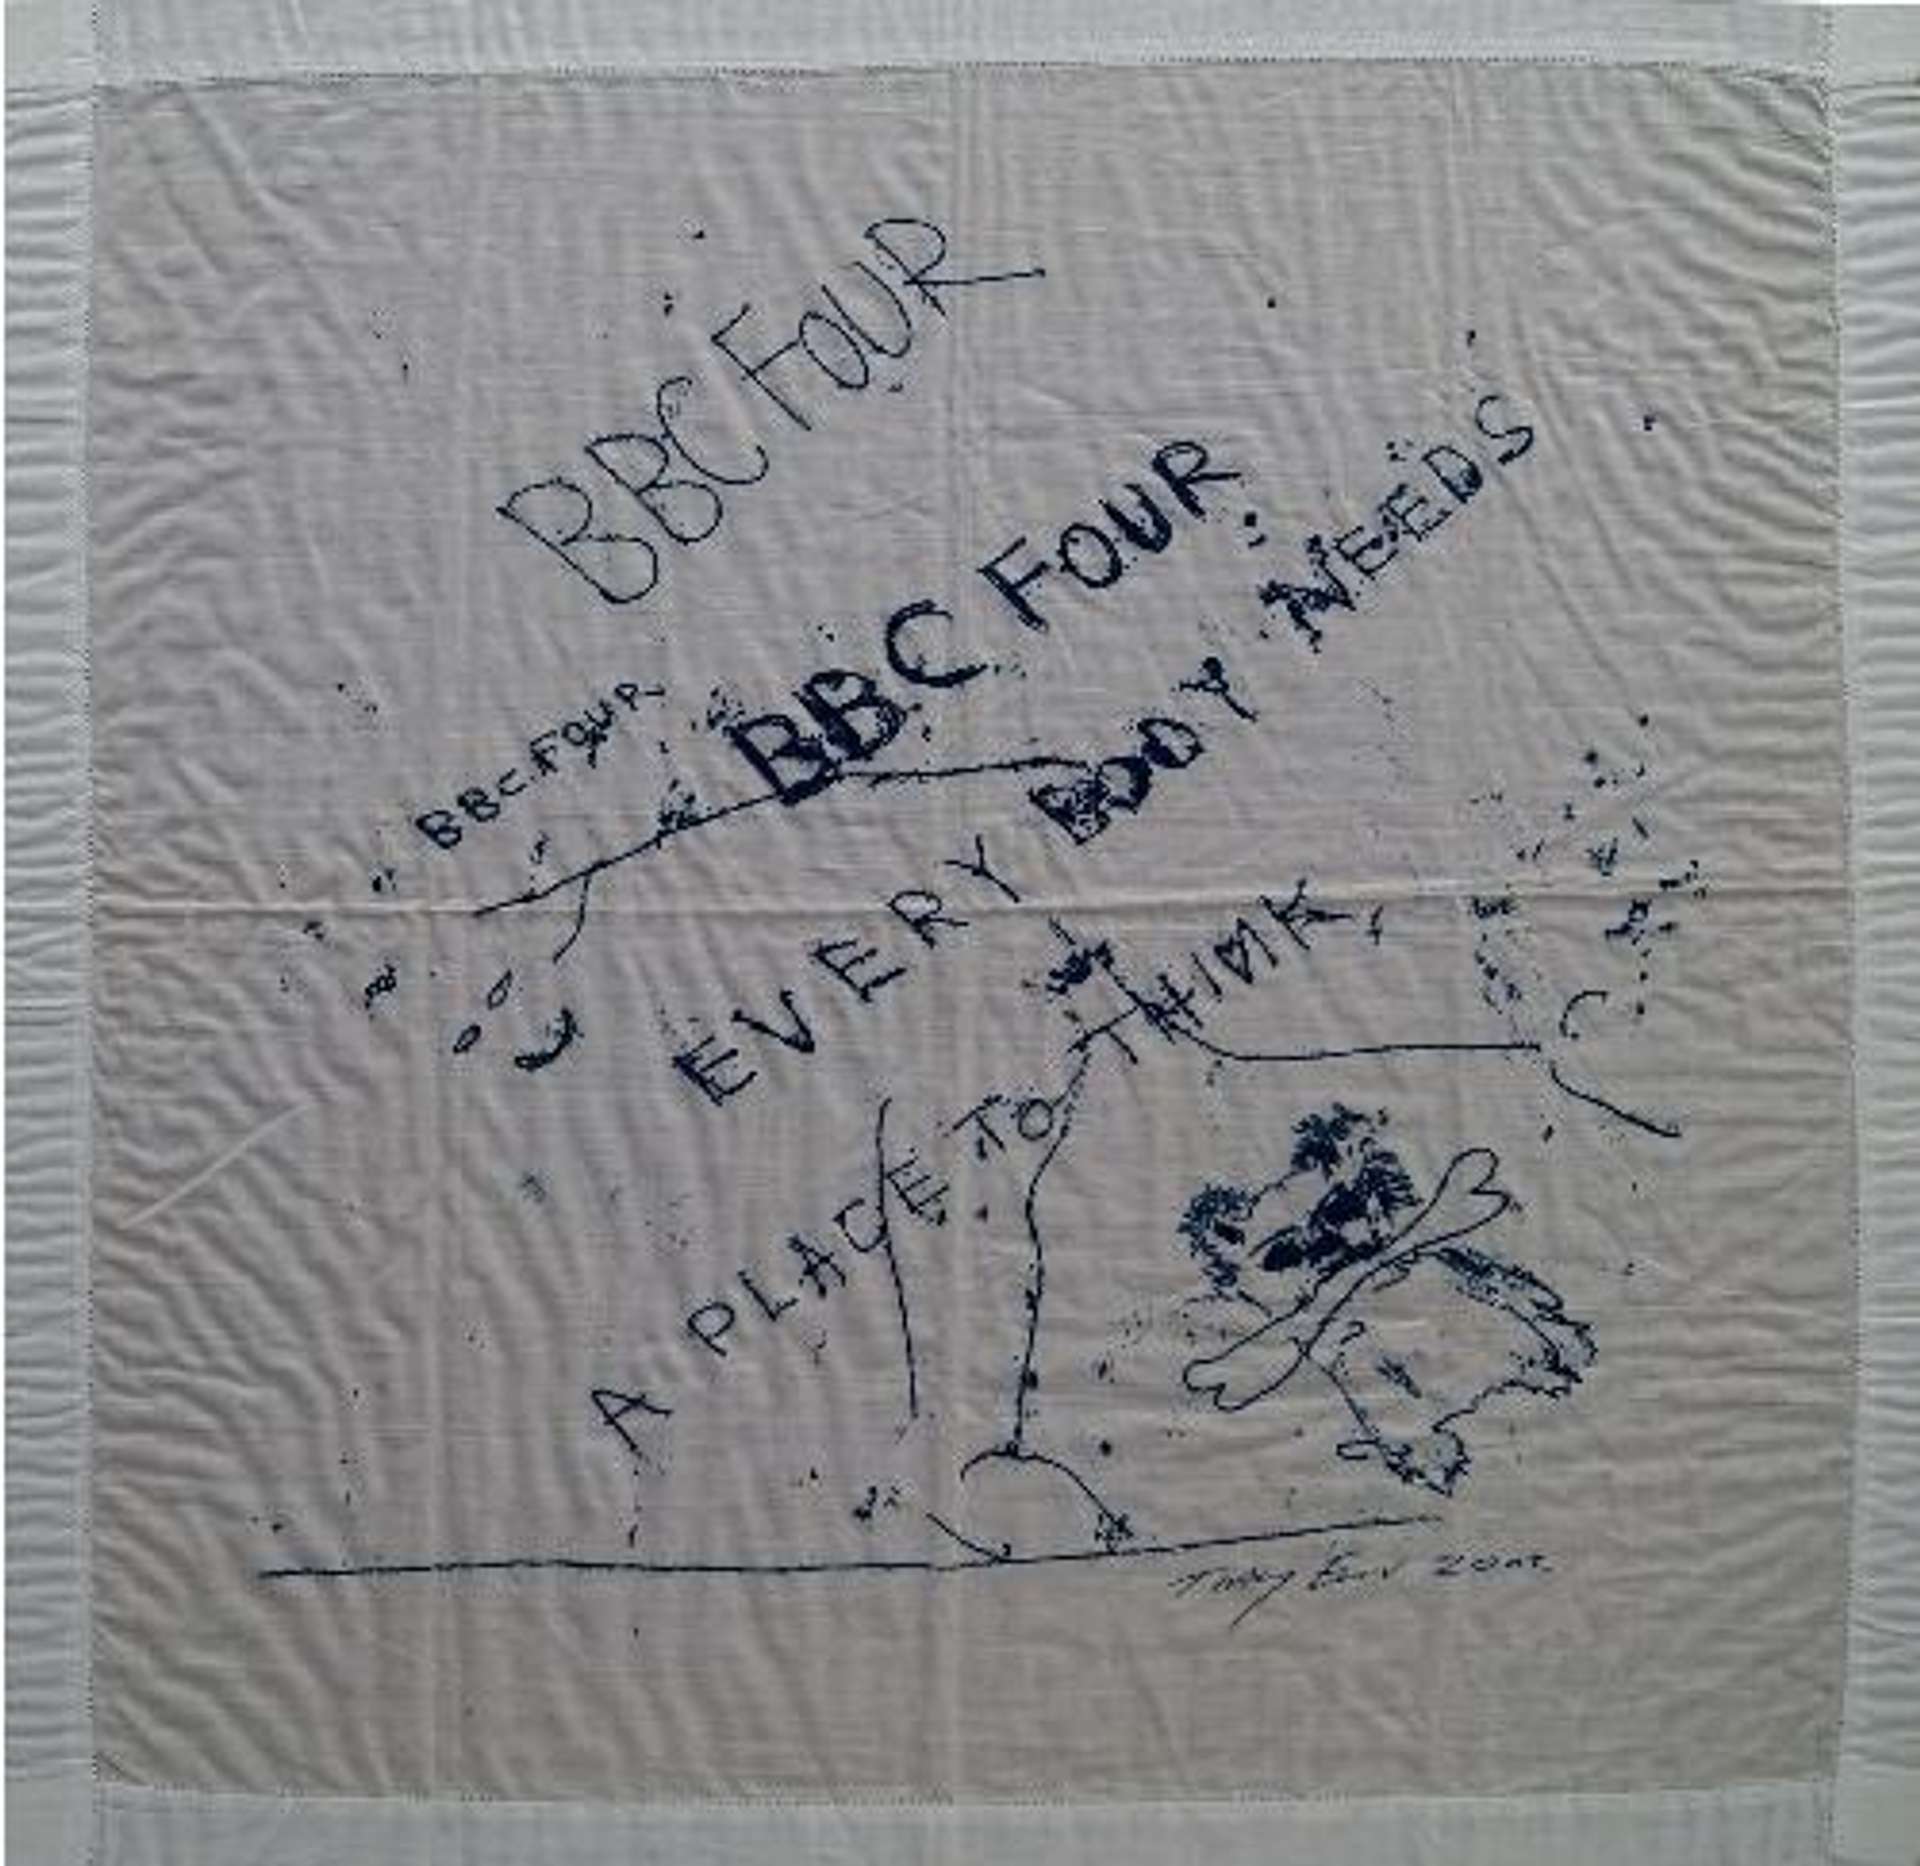 Tracey Emin: Everybody Needs a Place to Think - Mixed Media